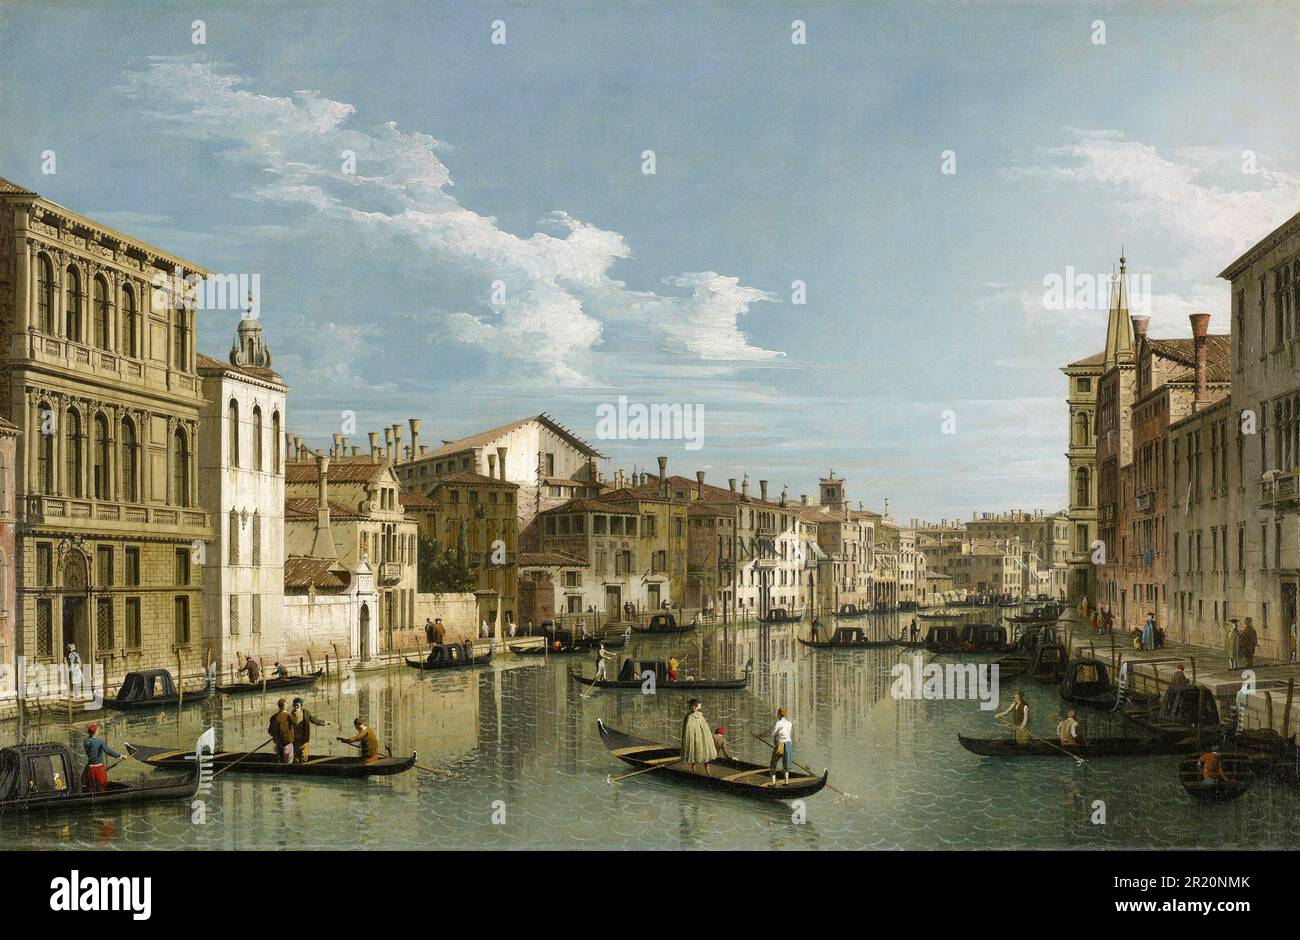 The Grand Canal in Venice from Palazzo Flangini to Campo San Marcuola, 1740, Italy, by Canaletto, Giovanni Antonio Canall, Historic, digitally restored reproduction from an 18th or 19th century original  /  Der Canal Grande in Venedig vom Palazzo Flangini zum Campo San Marcuola, 1740, Italien, von Canaletto, Giovanni Antonio Canall, Historisch, digital restaurierte Reproduktion von einer Vorlage aus dem 18. oder 19. Jahrhundert Stock Photo